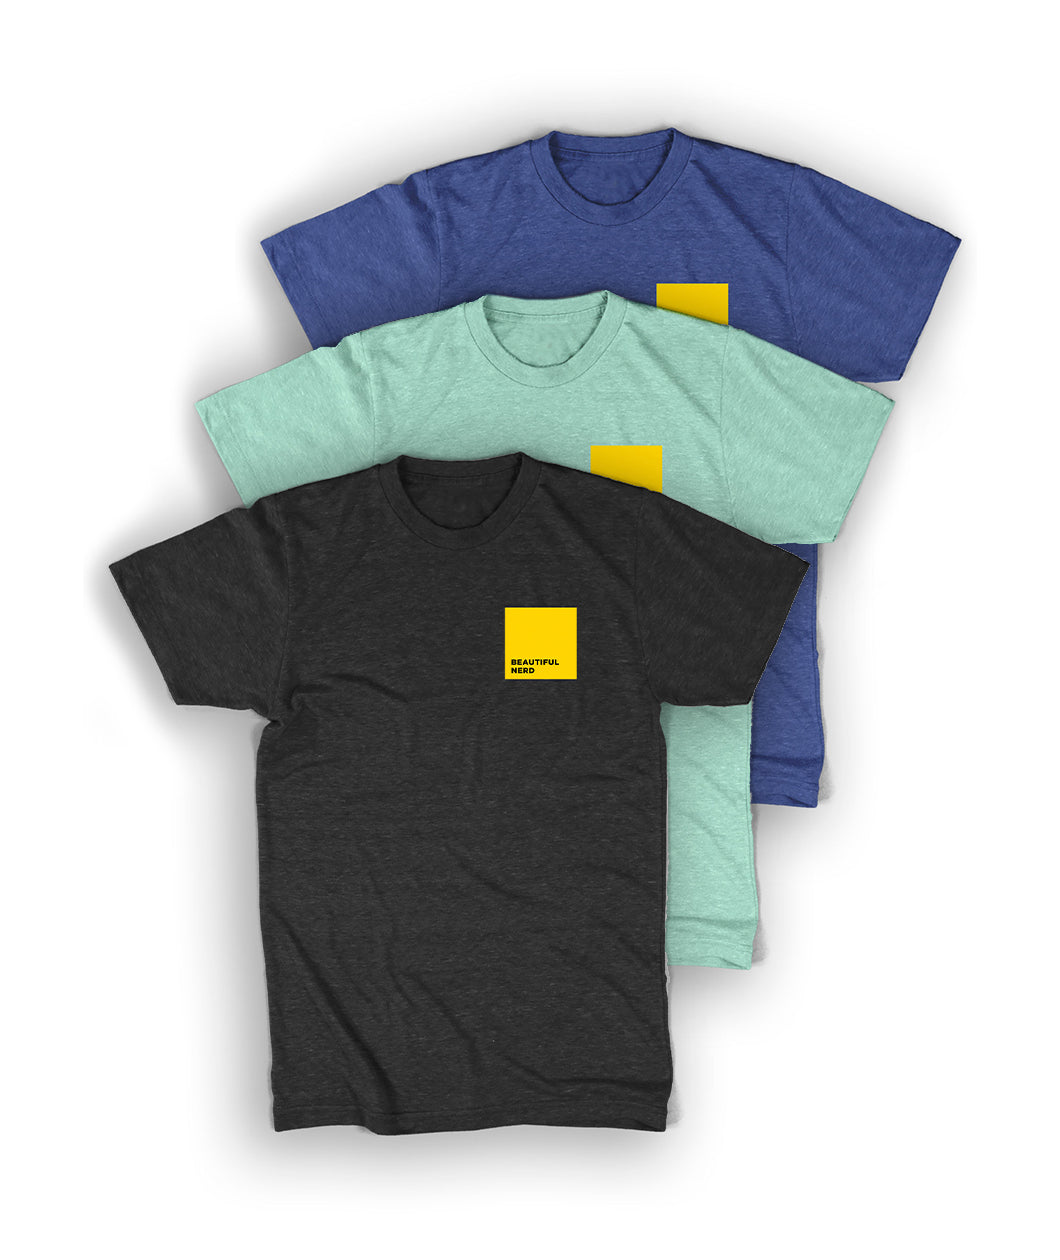 3 of the same t-shirt in grey, mint, and royal blue - by 99% Invisible